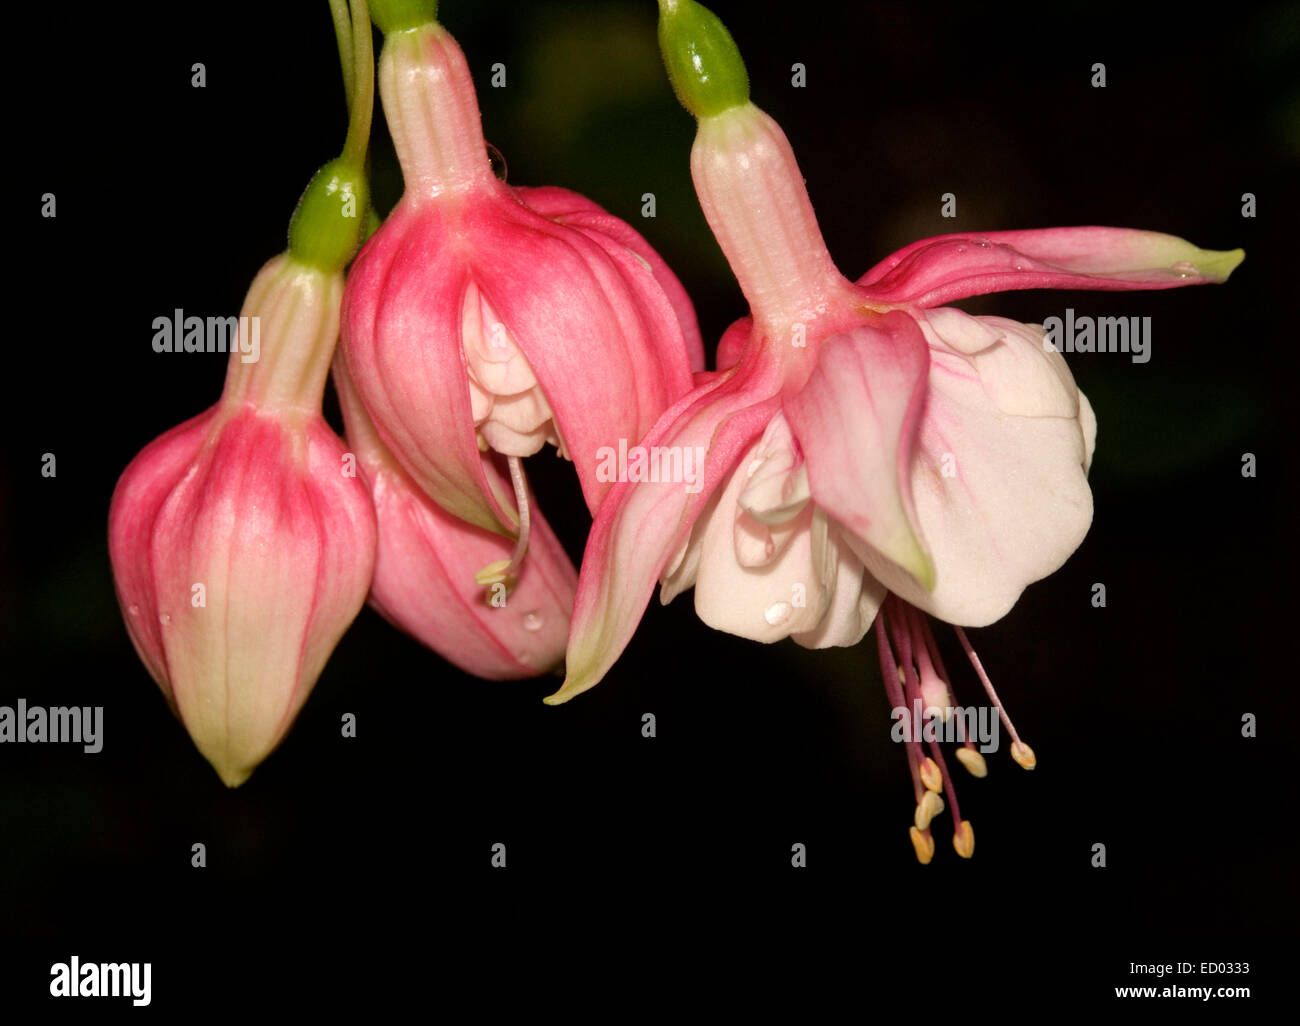 Cluster of beautiful pink and white flowers and buds of Fuchsia 'Swing-a-long' against black background Stock Photo